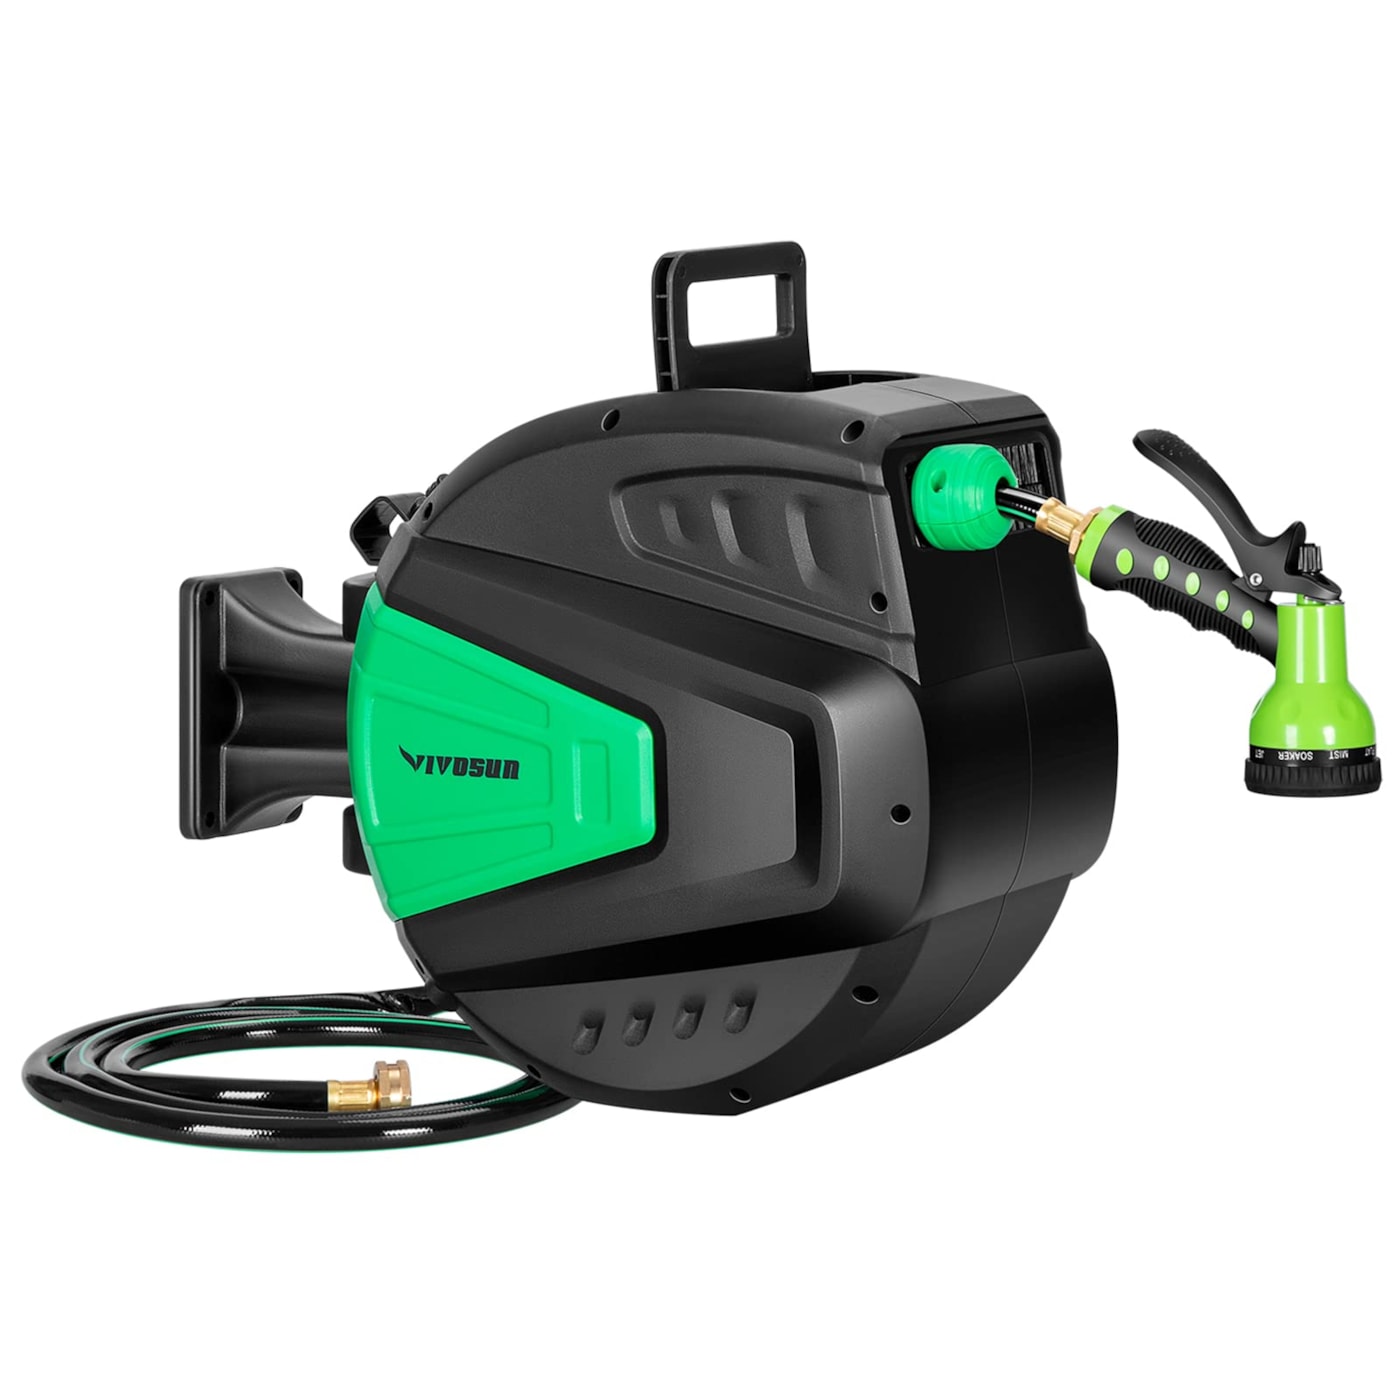 VIVOSUN 65FT Retractable Hose Reel, Wall-Mounted 1/2Inch Automatically Rewind Garden Hose Reel with a 9-Pattern Nozzle, 180° Swivel Bracket, and Lock at Any Length